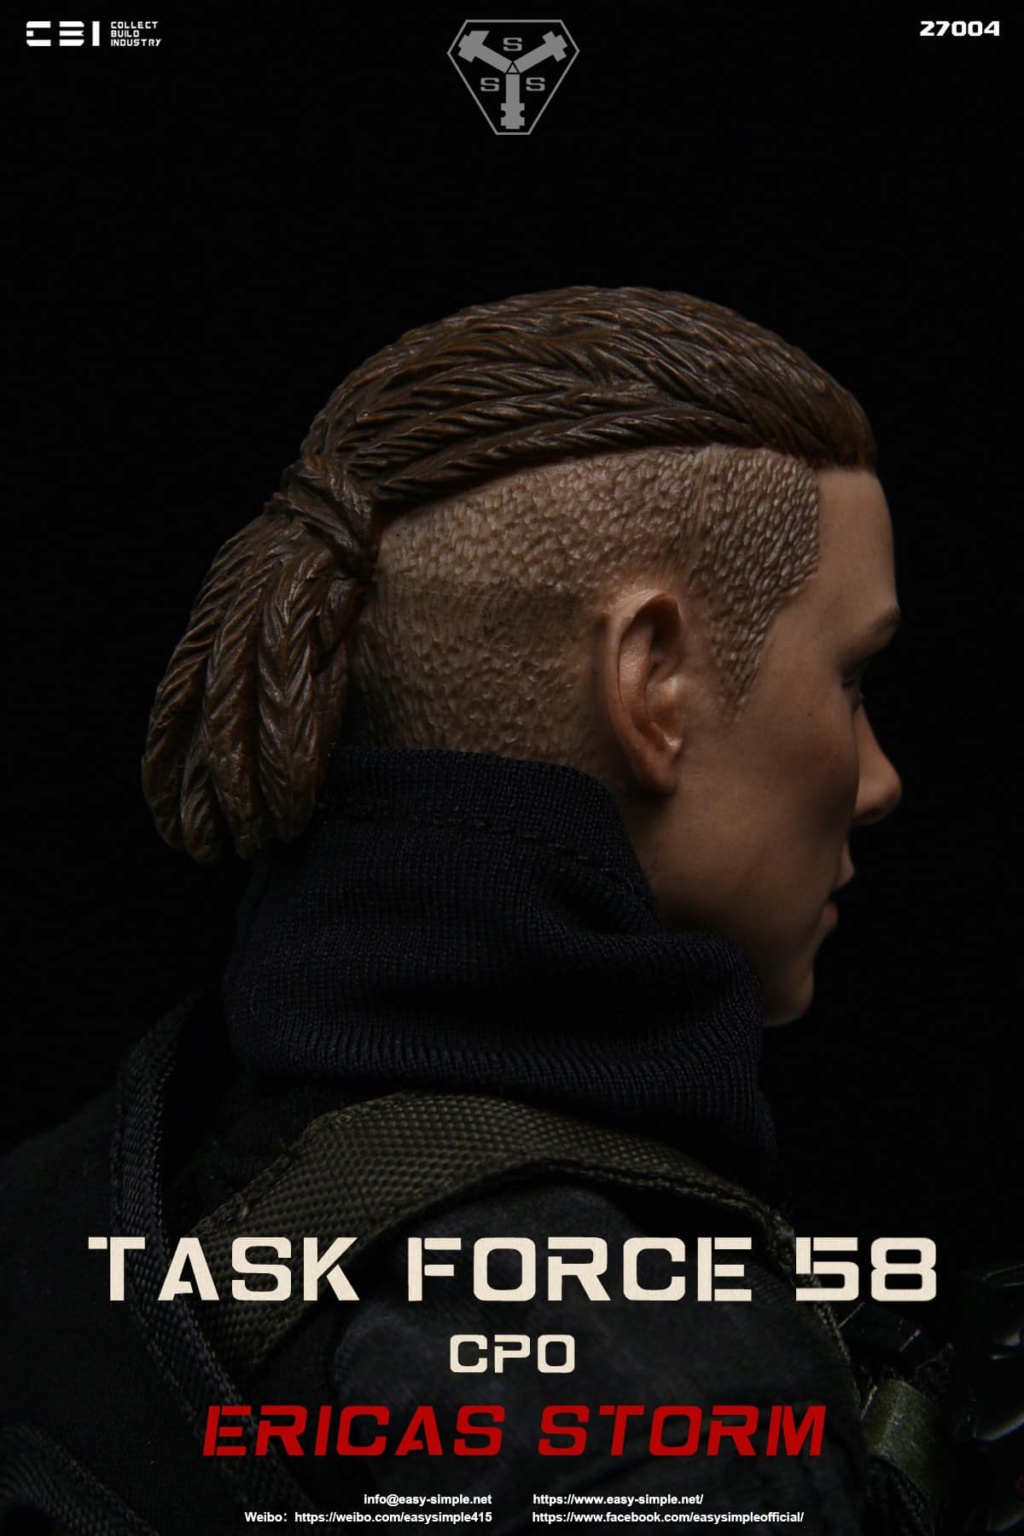 NEW PRODUCT: CBI & Easy&Simple: 27004 1/6 ERICA STORM - TASK FORCE 58 CPO action figure 4731